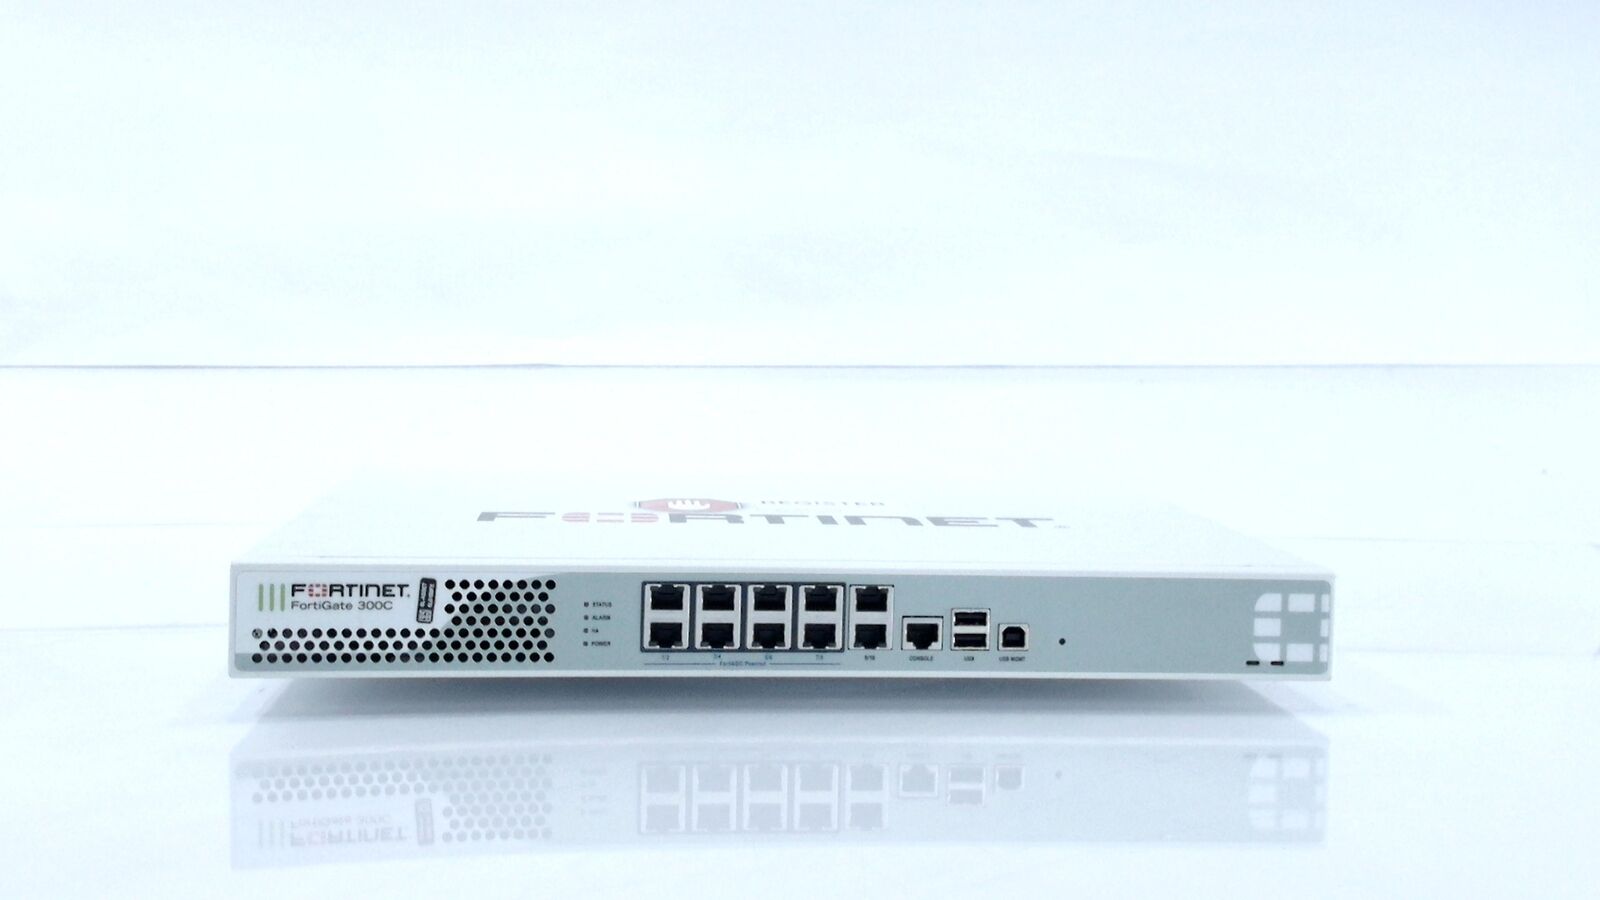 FORTINET FG-300C 10x GE RJ45 ports (including 8x FortiASIC-accelerated ports,